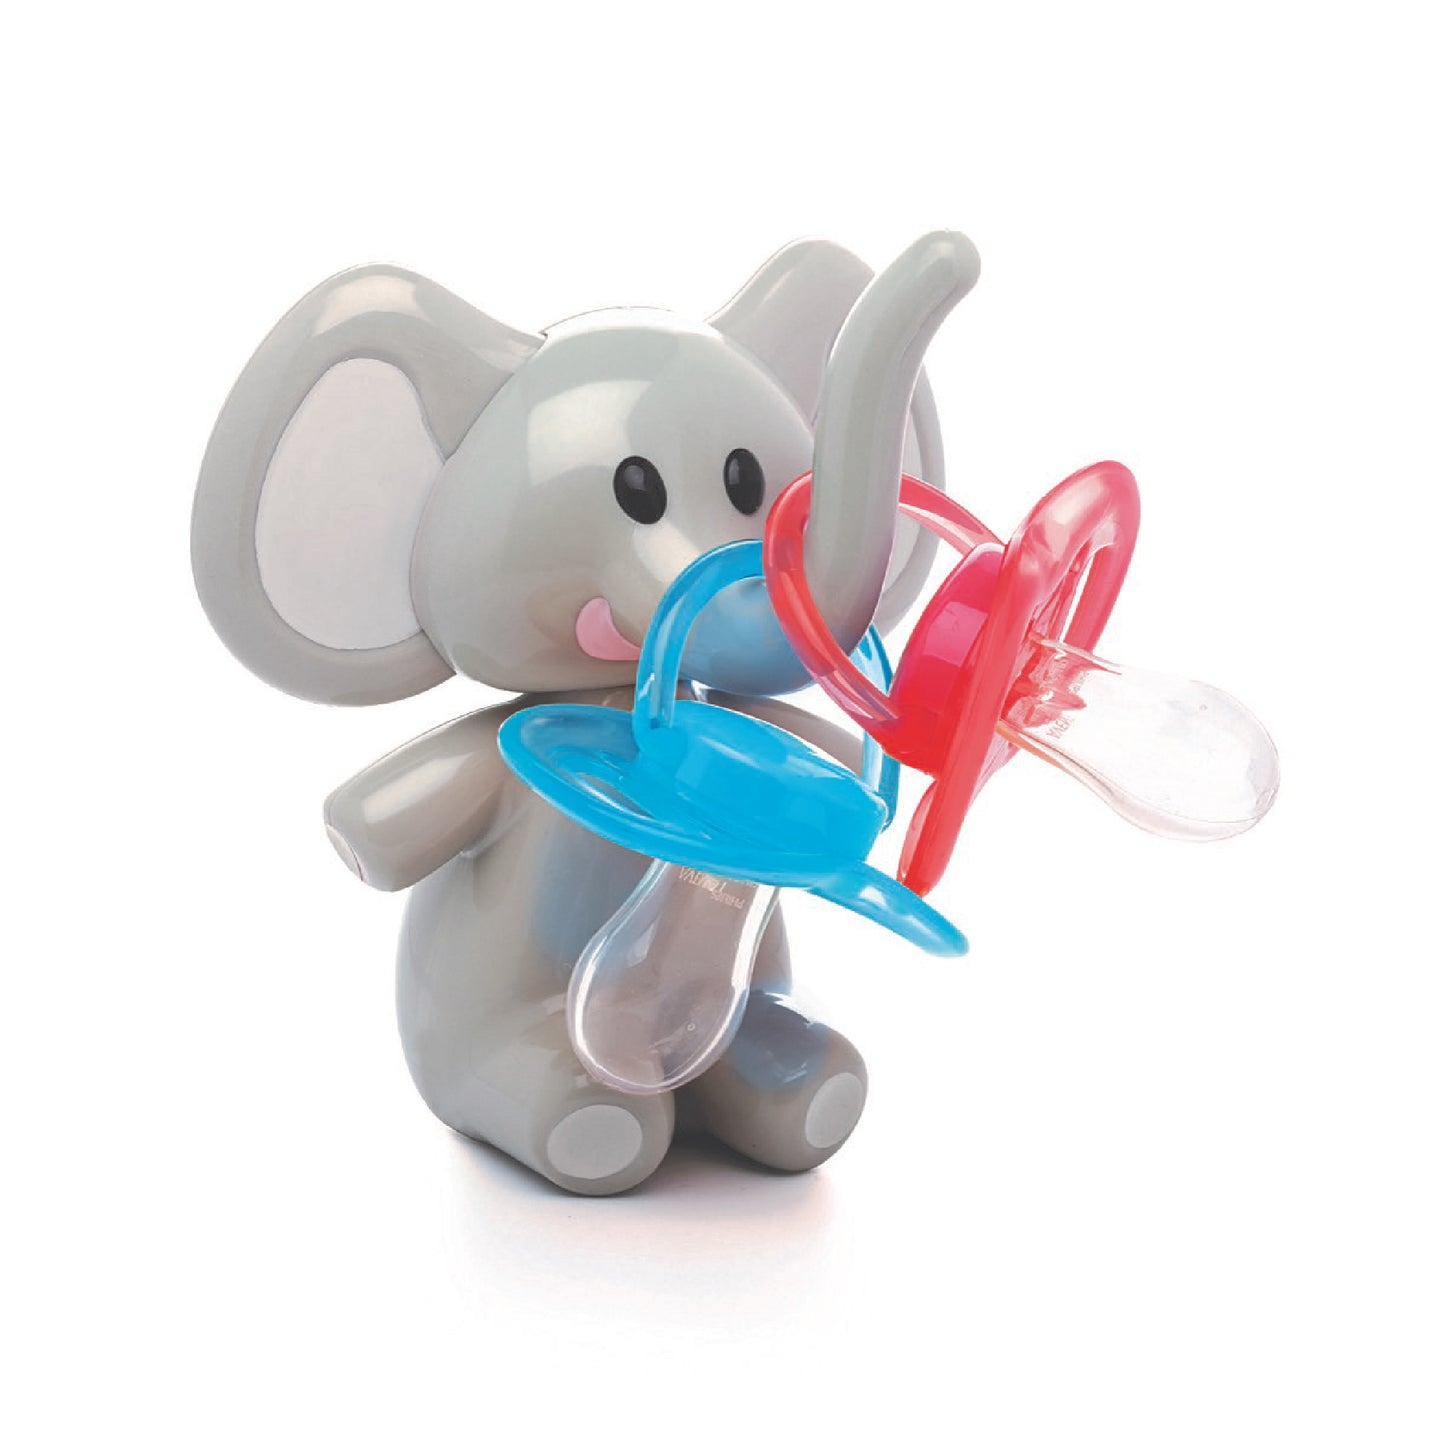 Melii Elephant Grey Ears Pacifier Holder - Adorable and Practical Baby Pacifier Storage with Innovative Suspension System and BPA-Free Safety